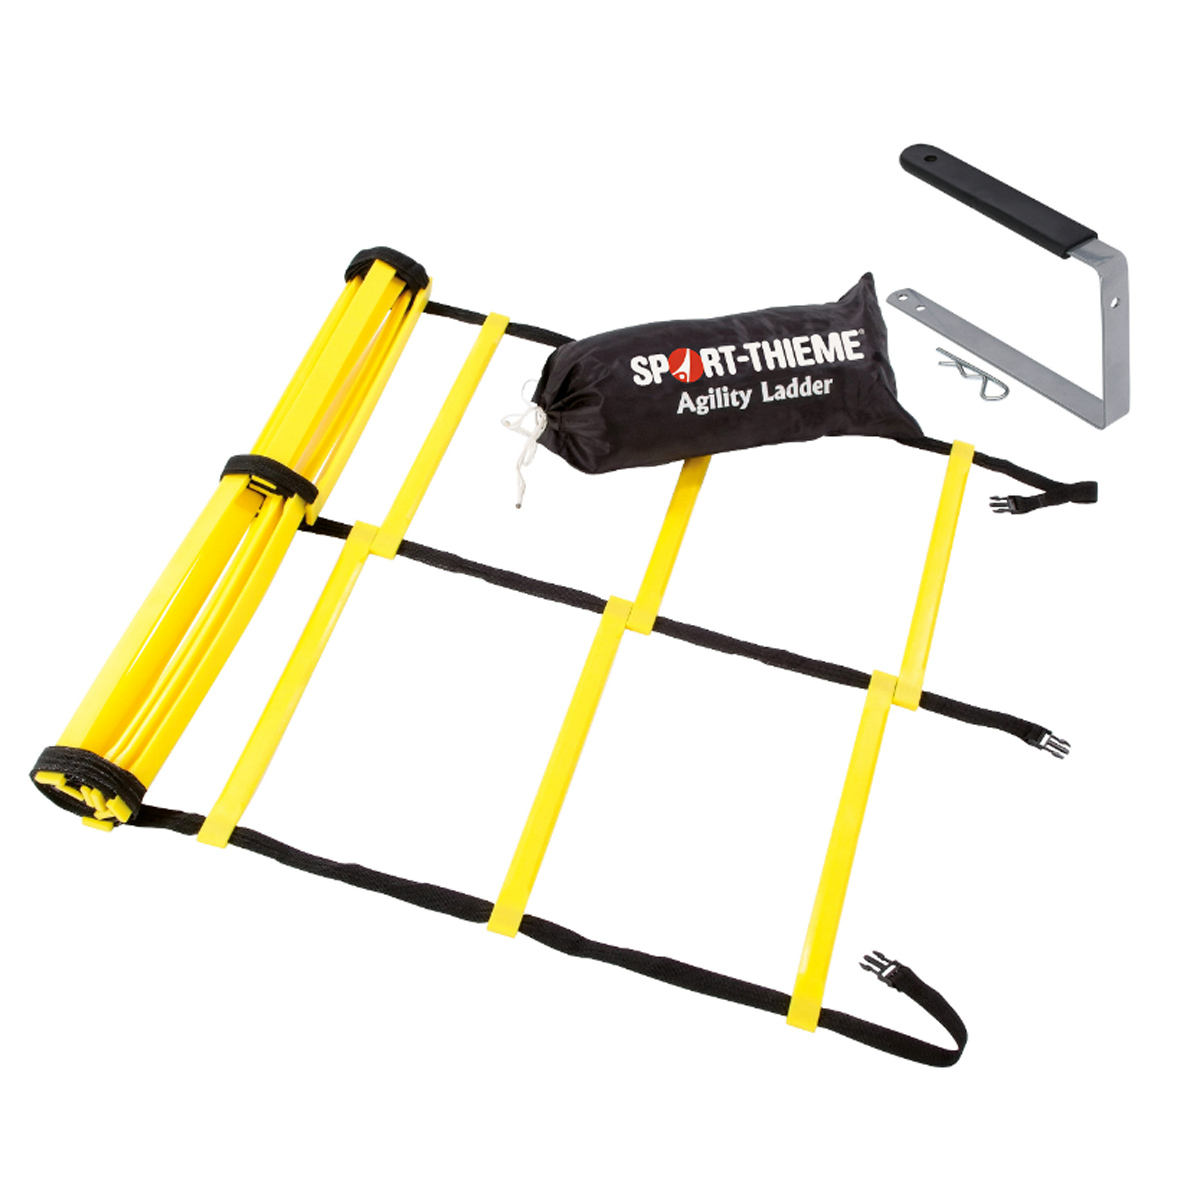 Coordination ladder "Agility" Double- ladder 8m black/yellow